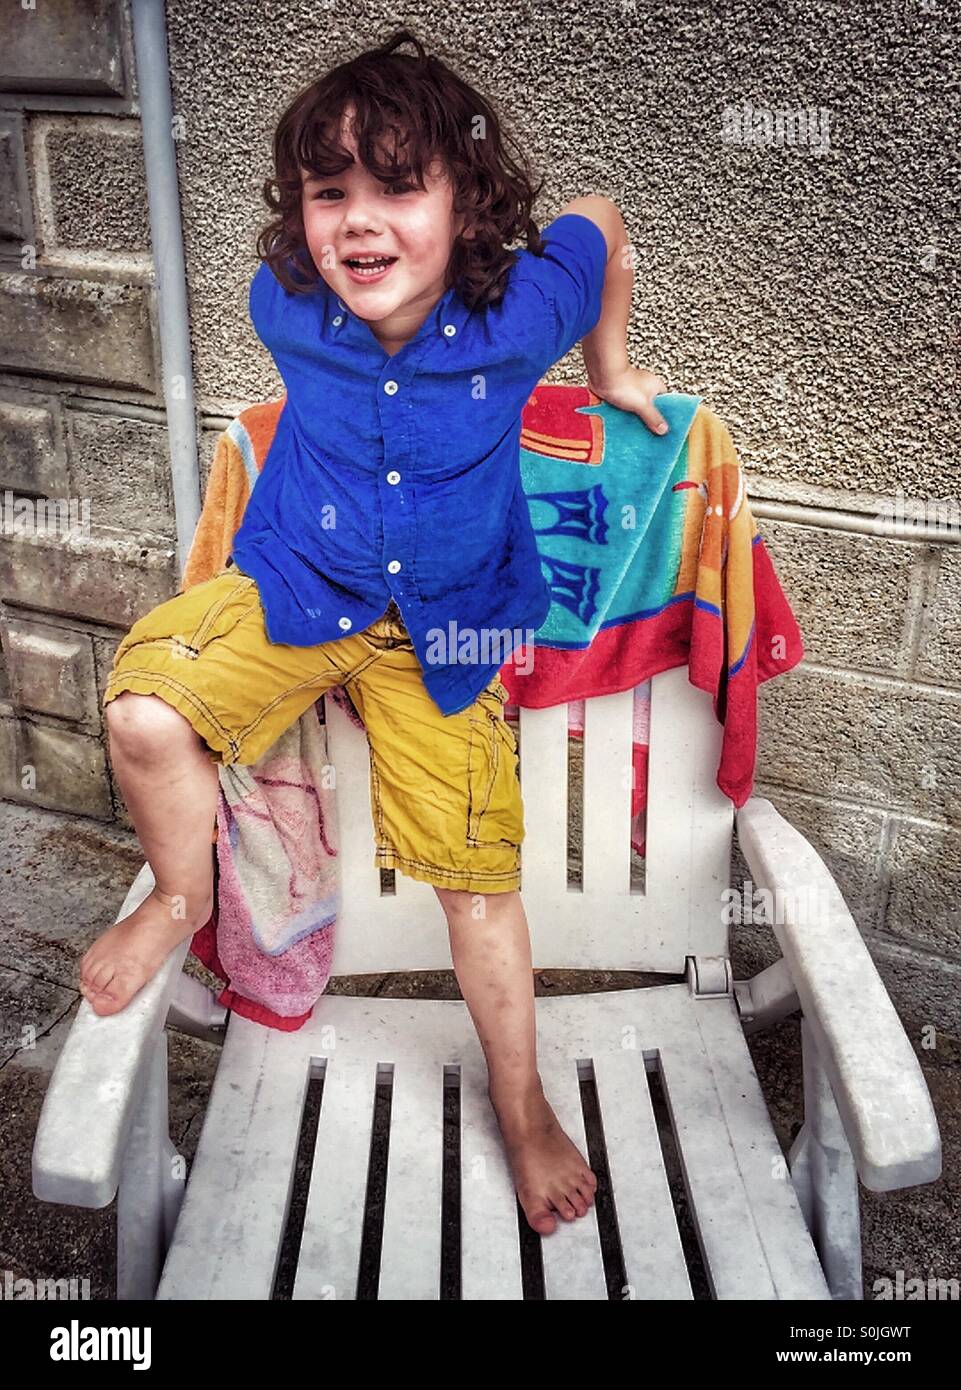 Four year old boy standing on patio chair Stock Photo